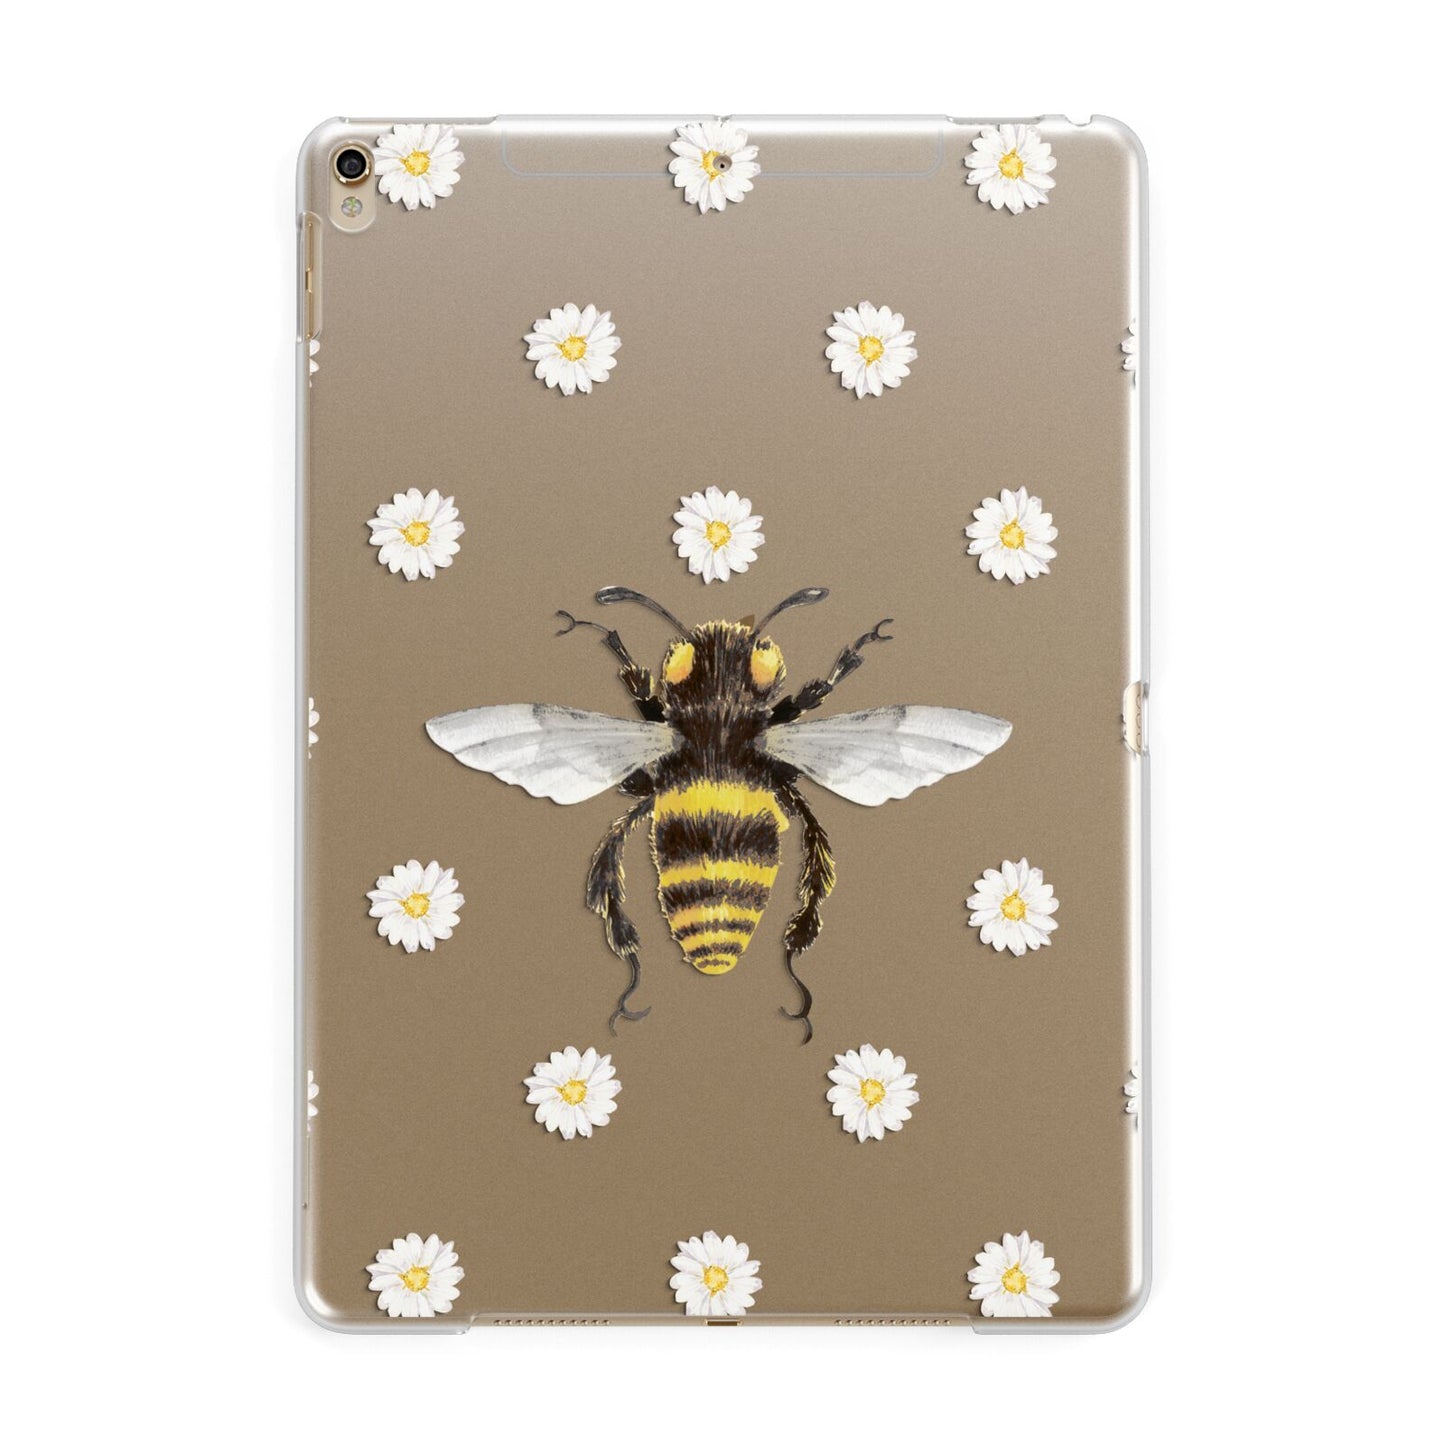 Bee Illustration with Daisies Apple iPad Gold Case